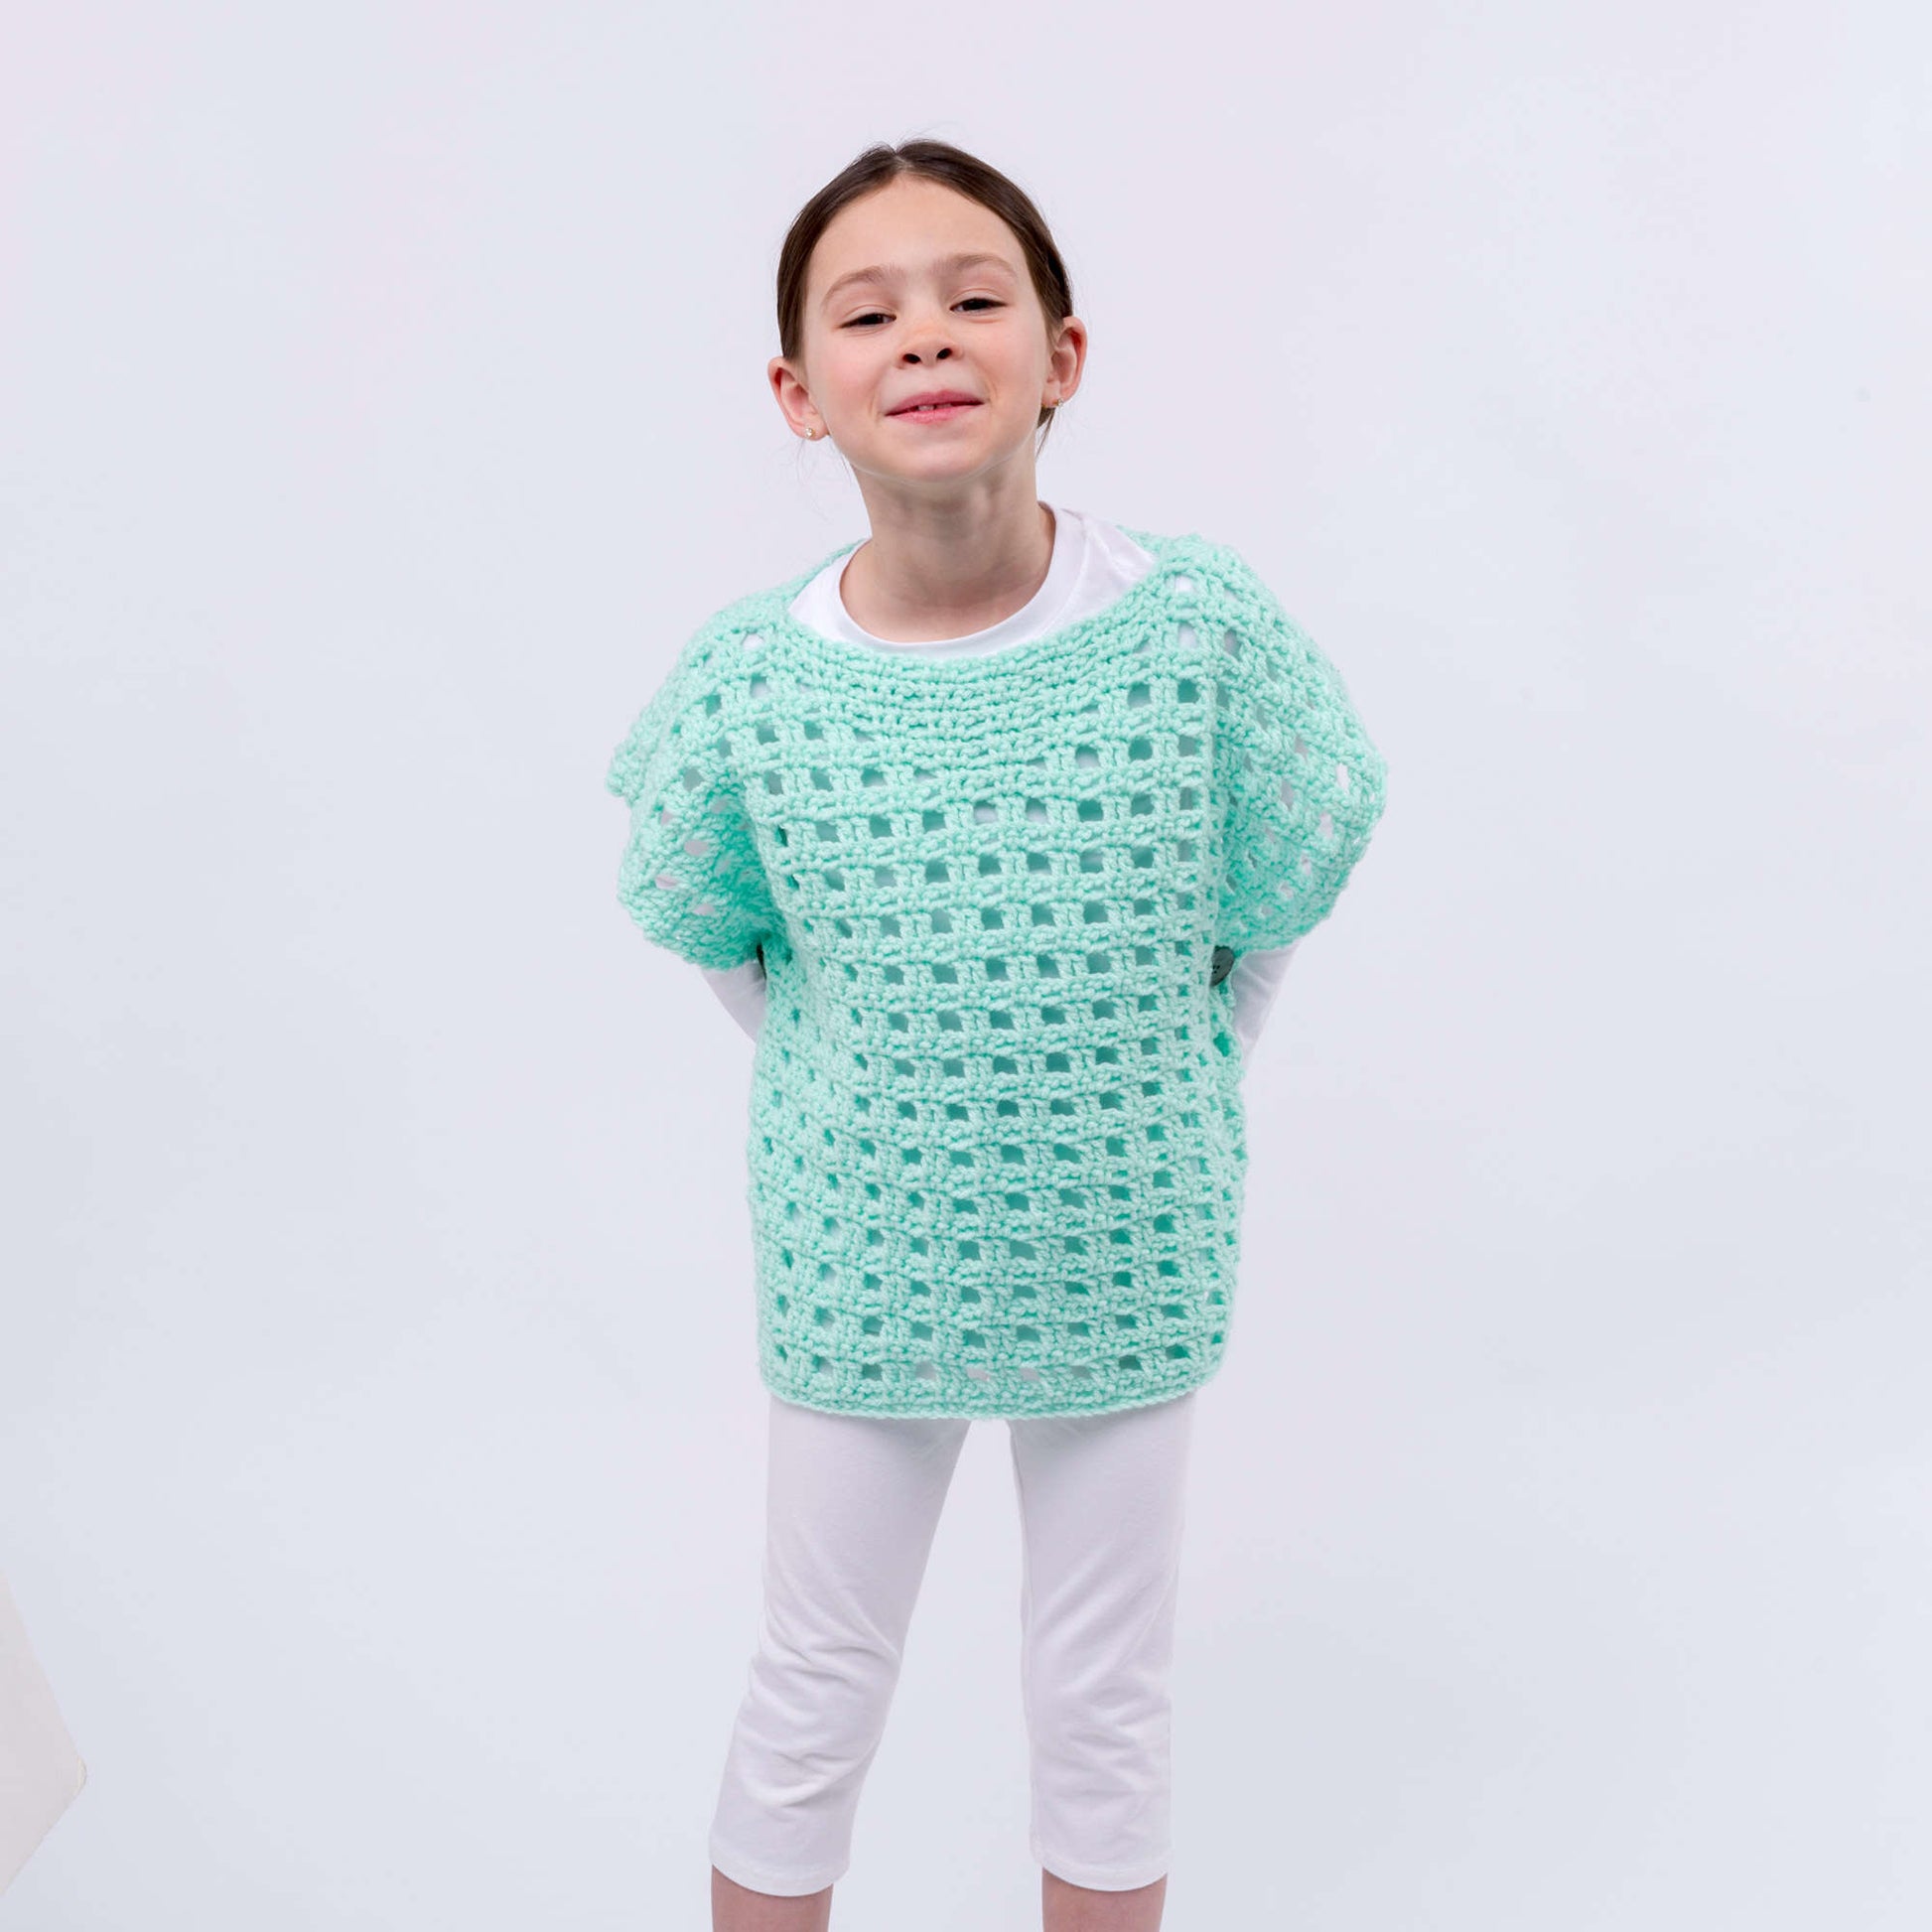 Free Red Heart Simply Stated Child Poncho Crochet Pattern